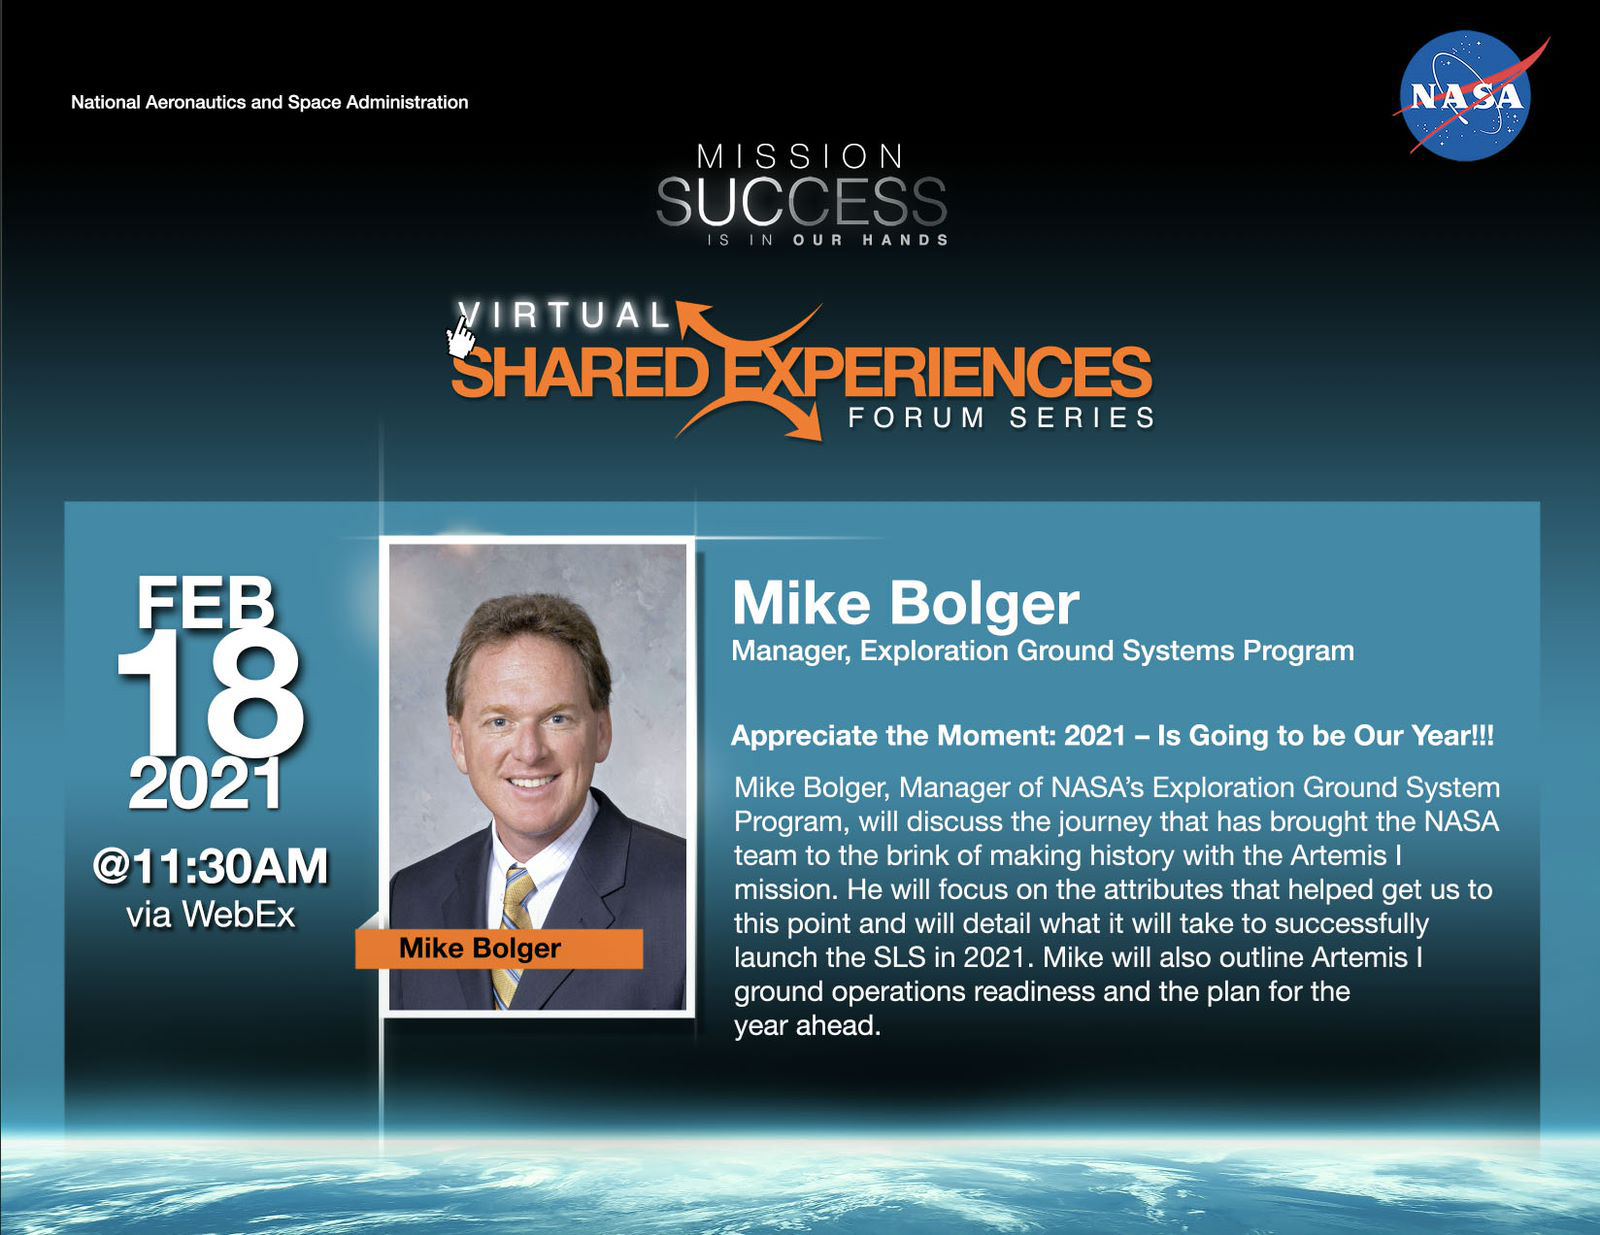 Mike Bolger, manager of the Exploration Ground Systems Program, will give a presentation via Webex at 11:30 a.m. Feb. 18.